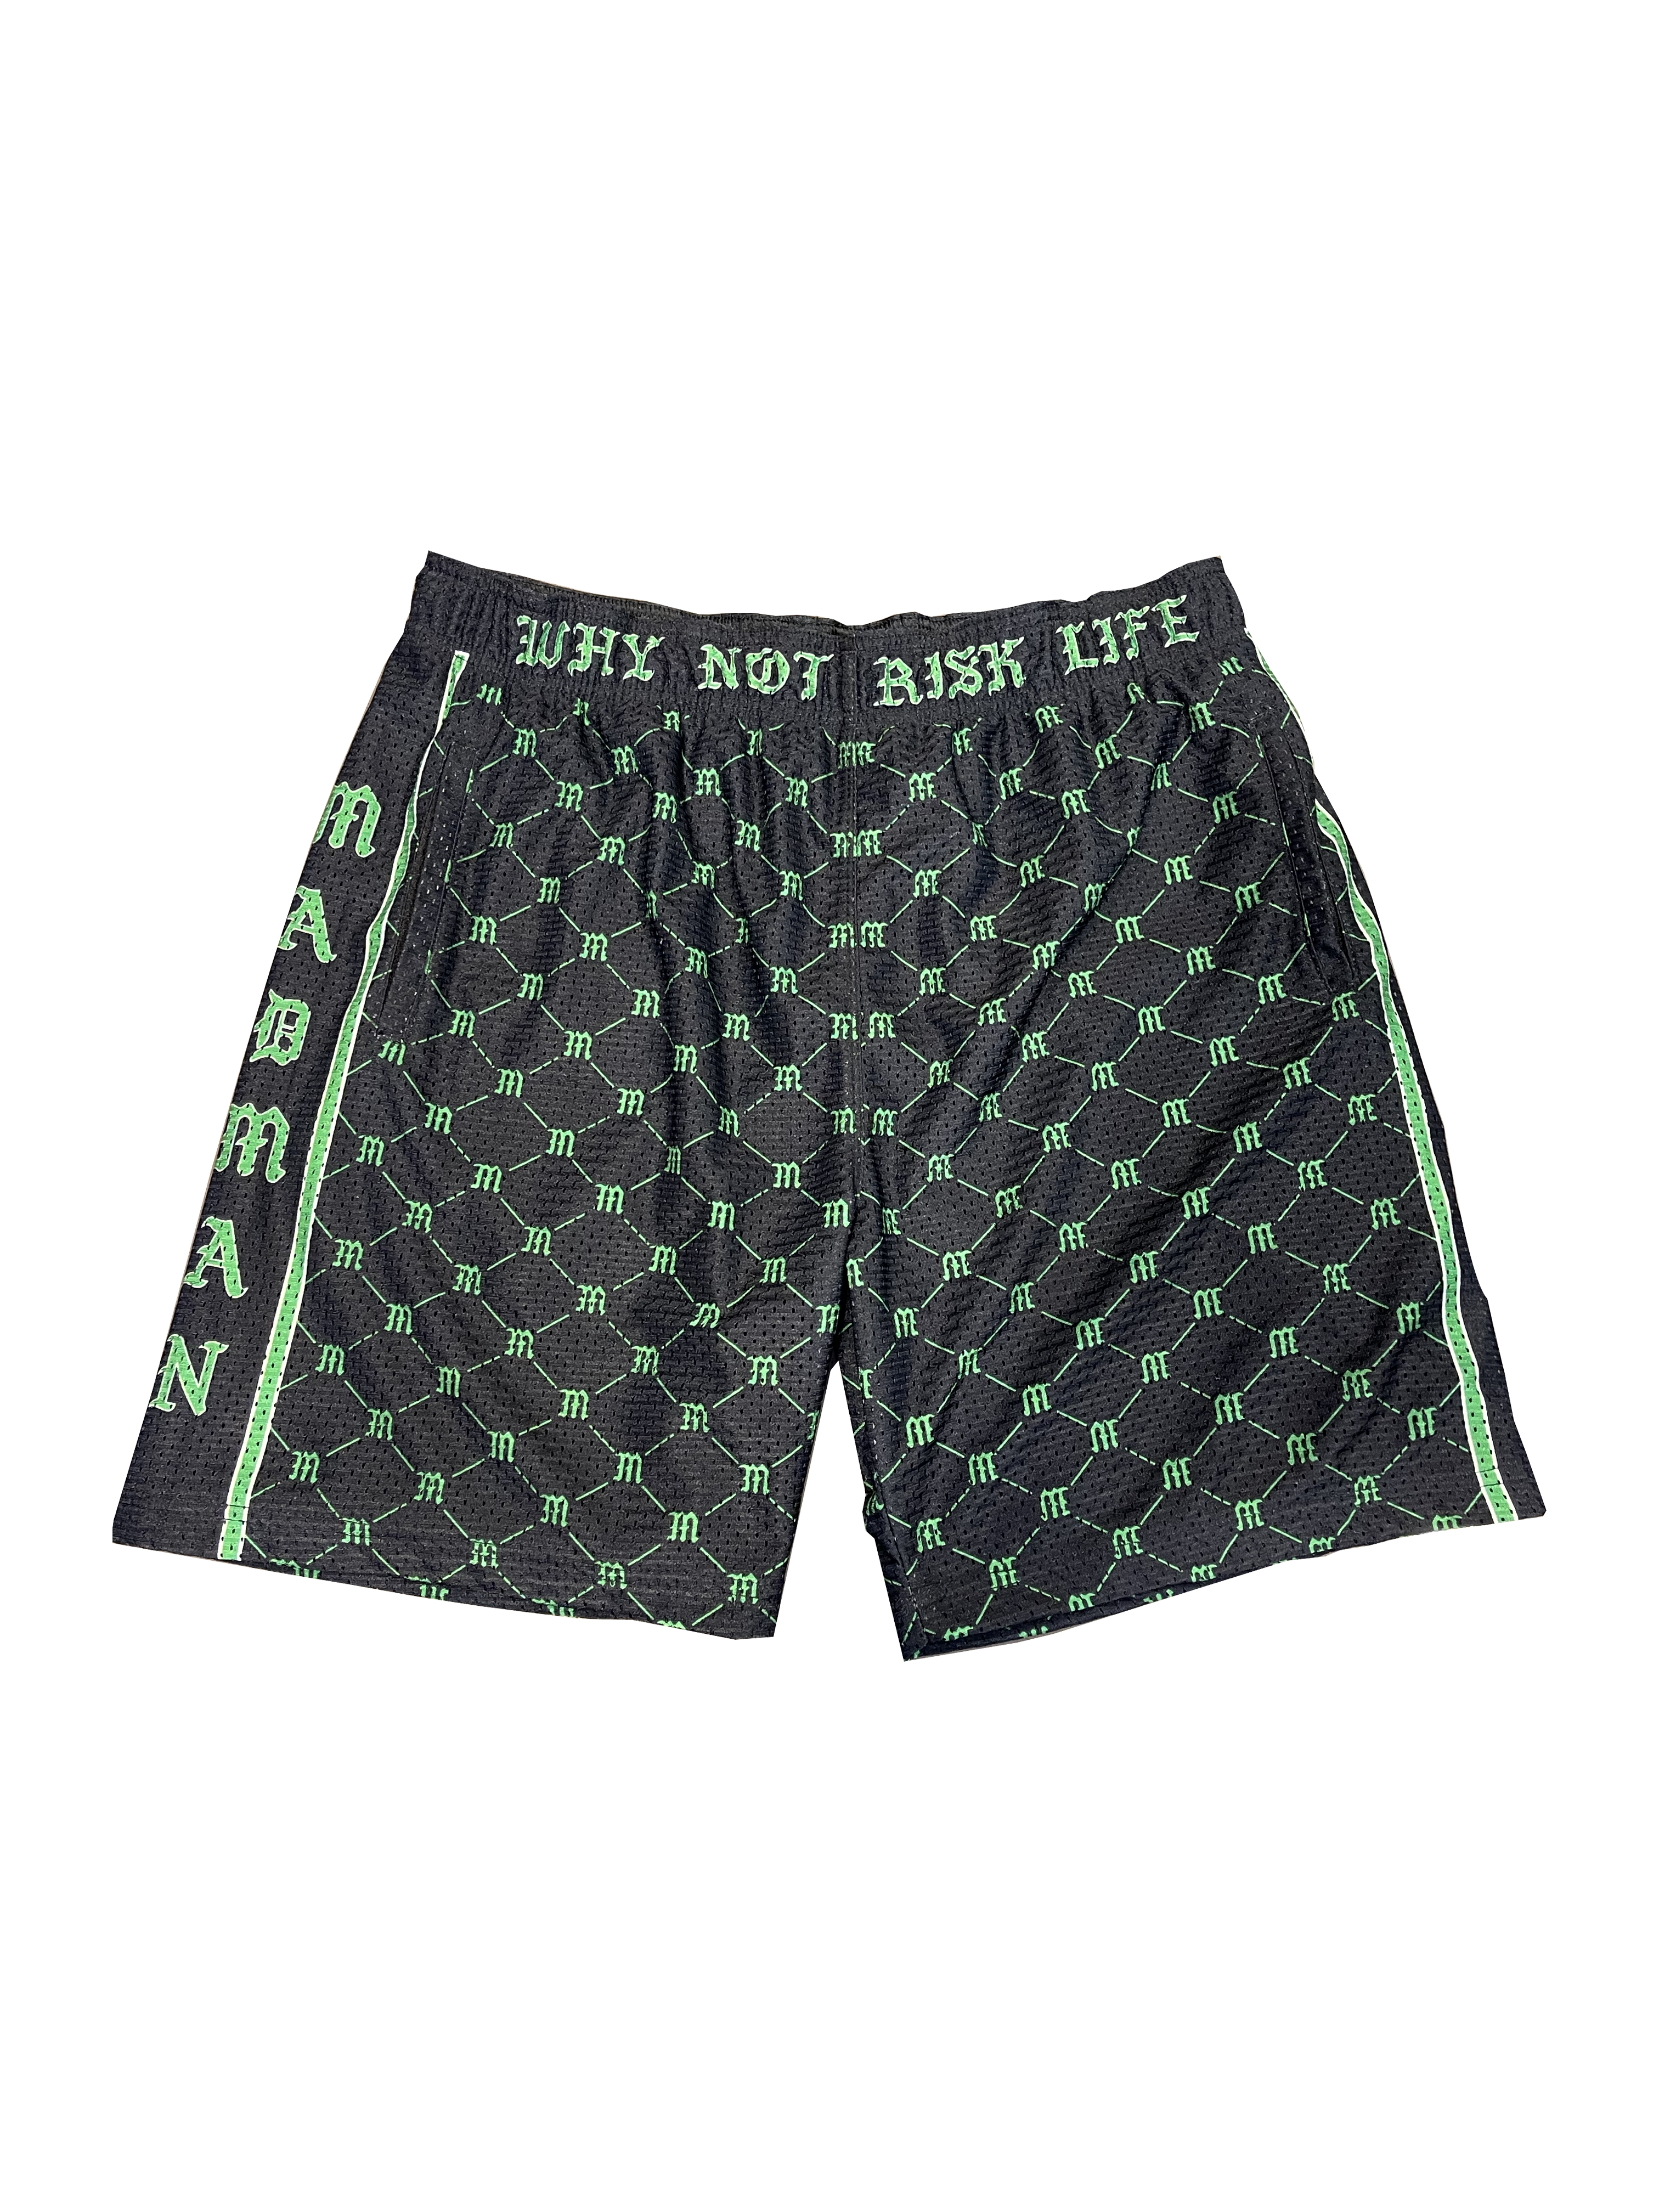 Slime Green 'Young Thug' Shorts – Madman Los Angeles